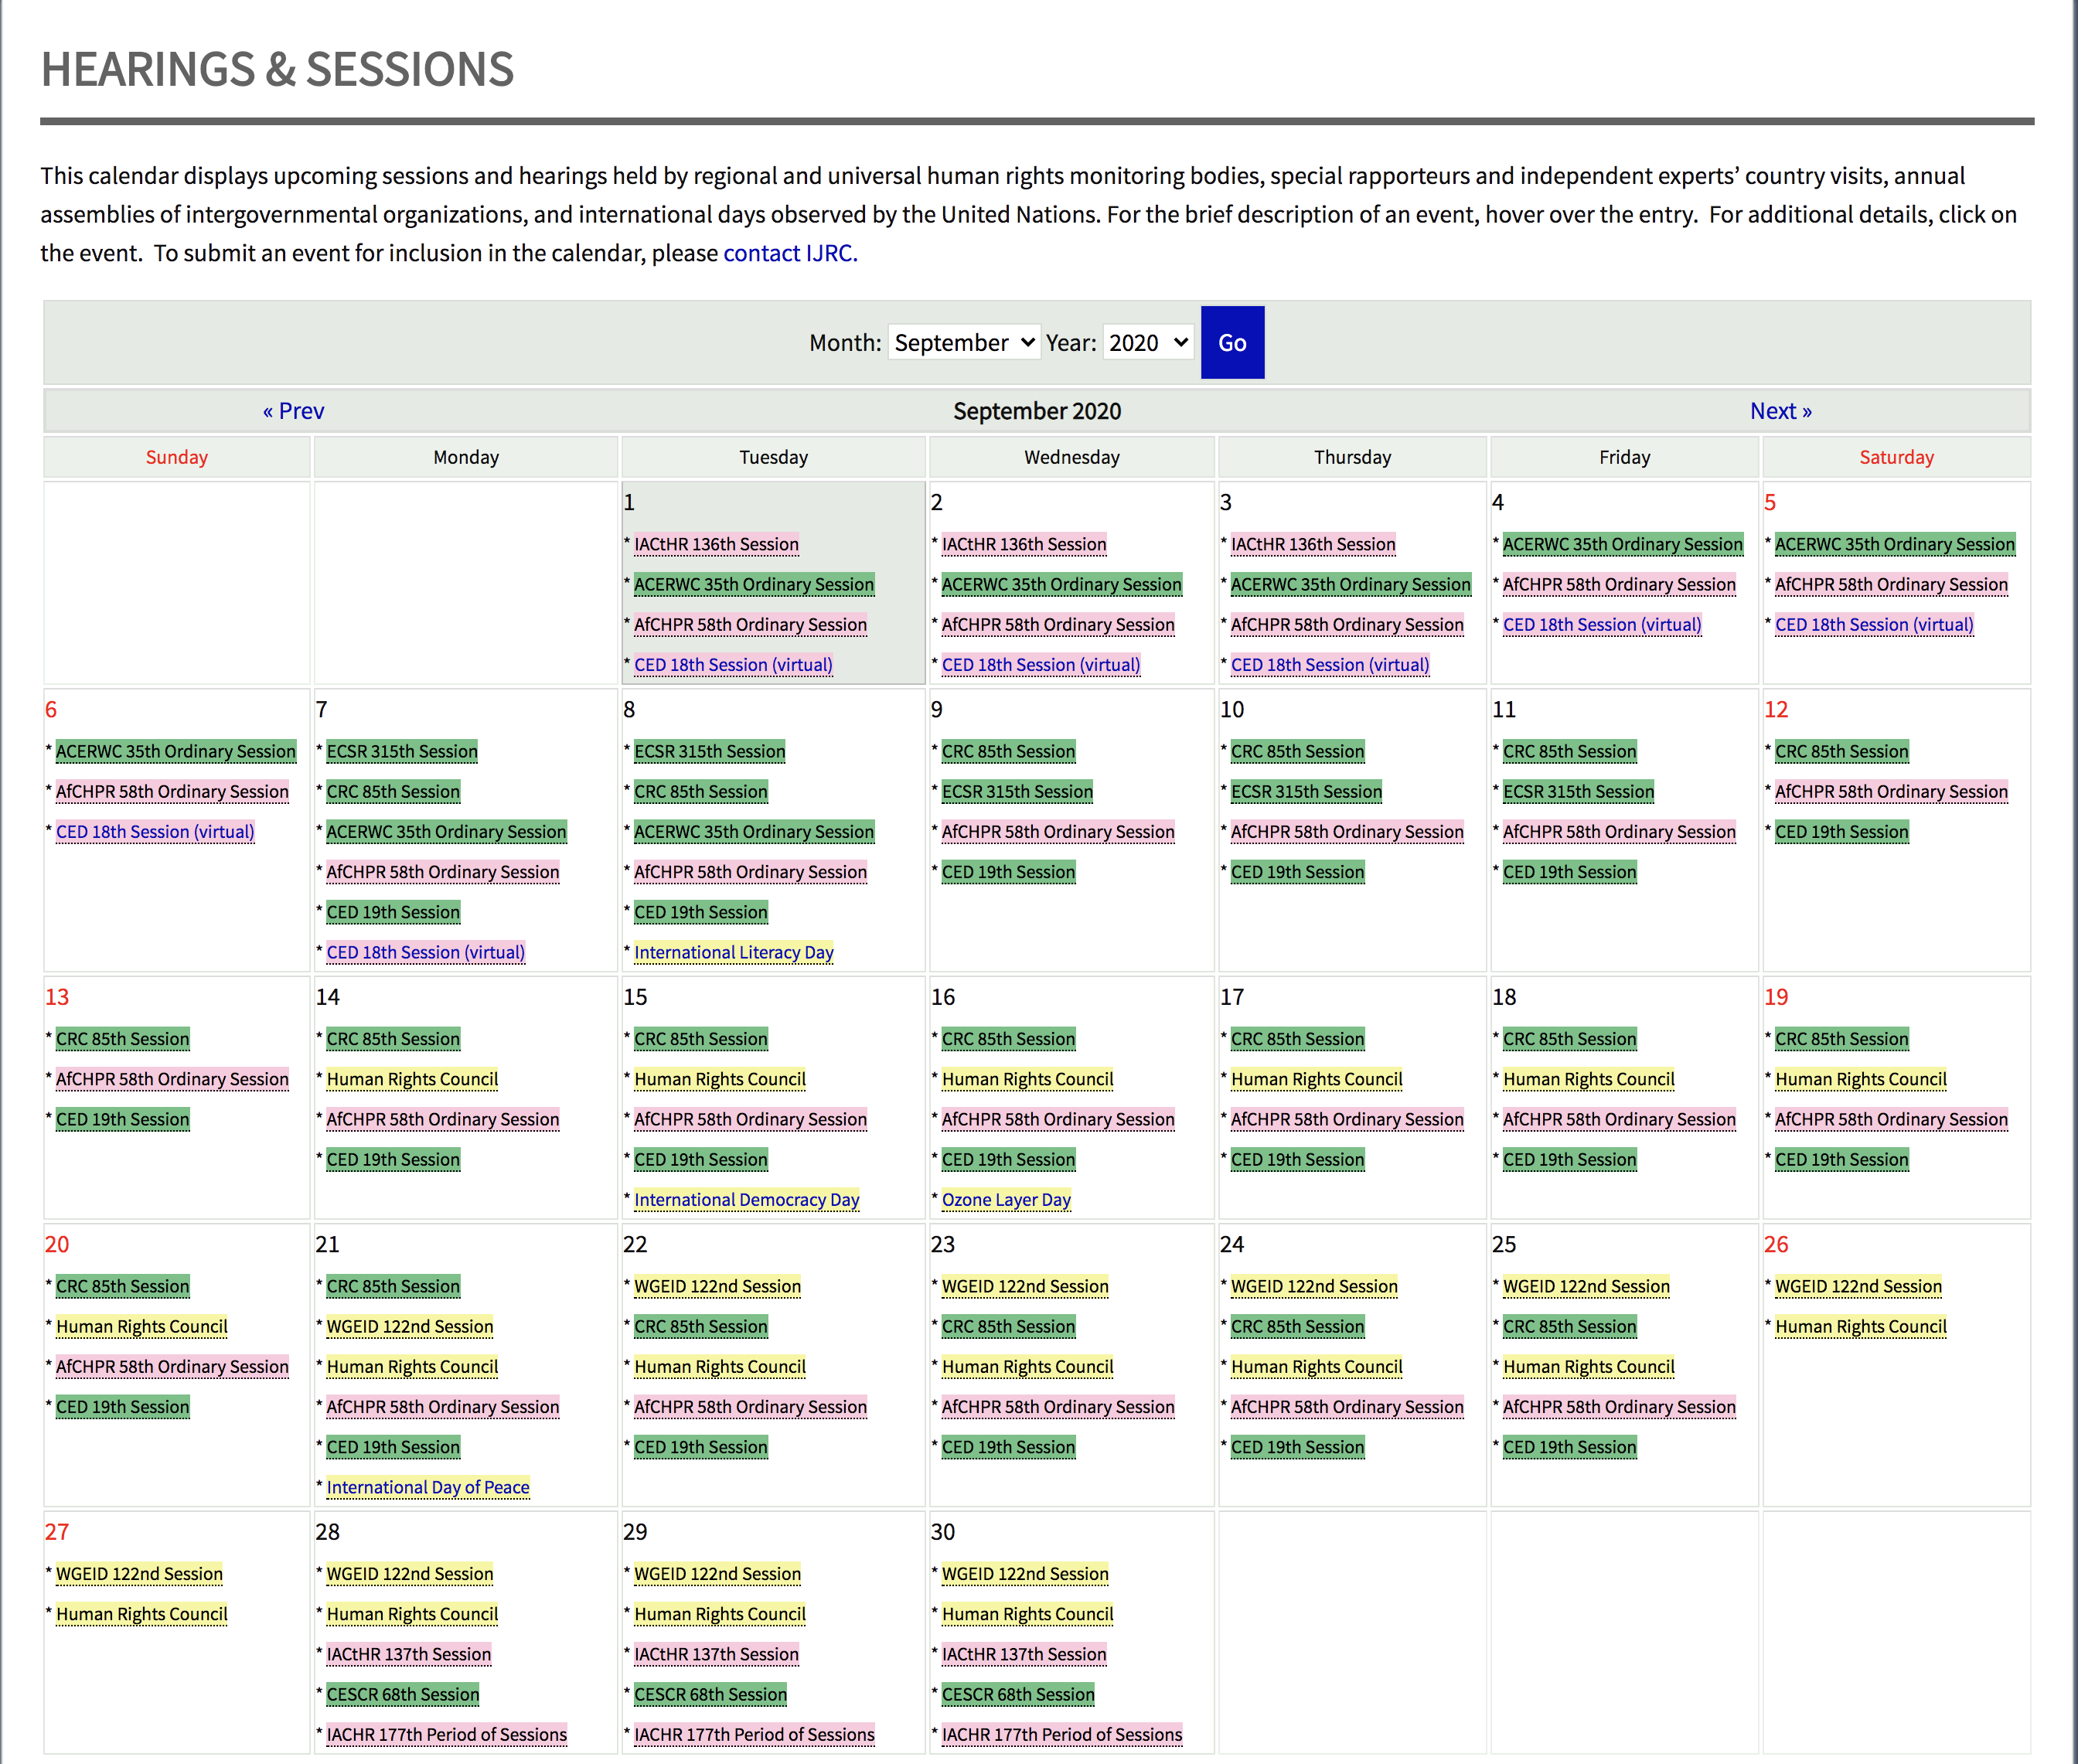 Calendar of human rights bodies' sessions